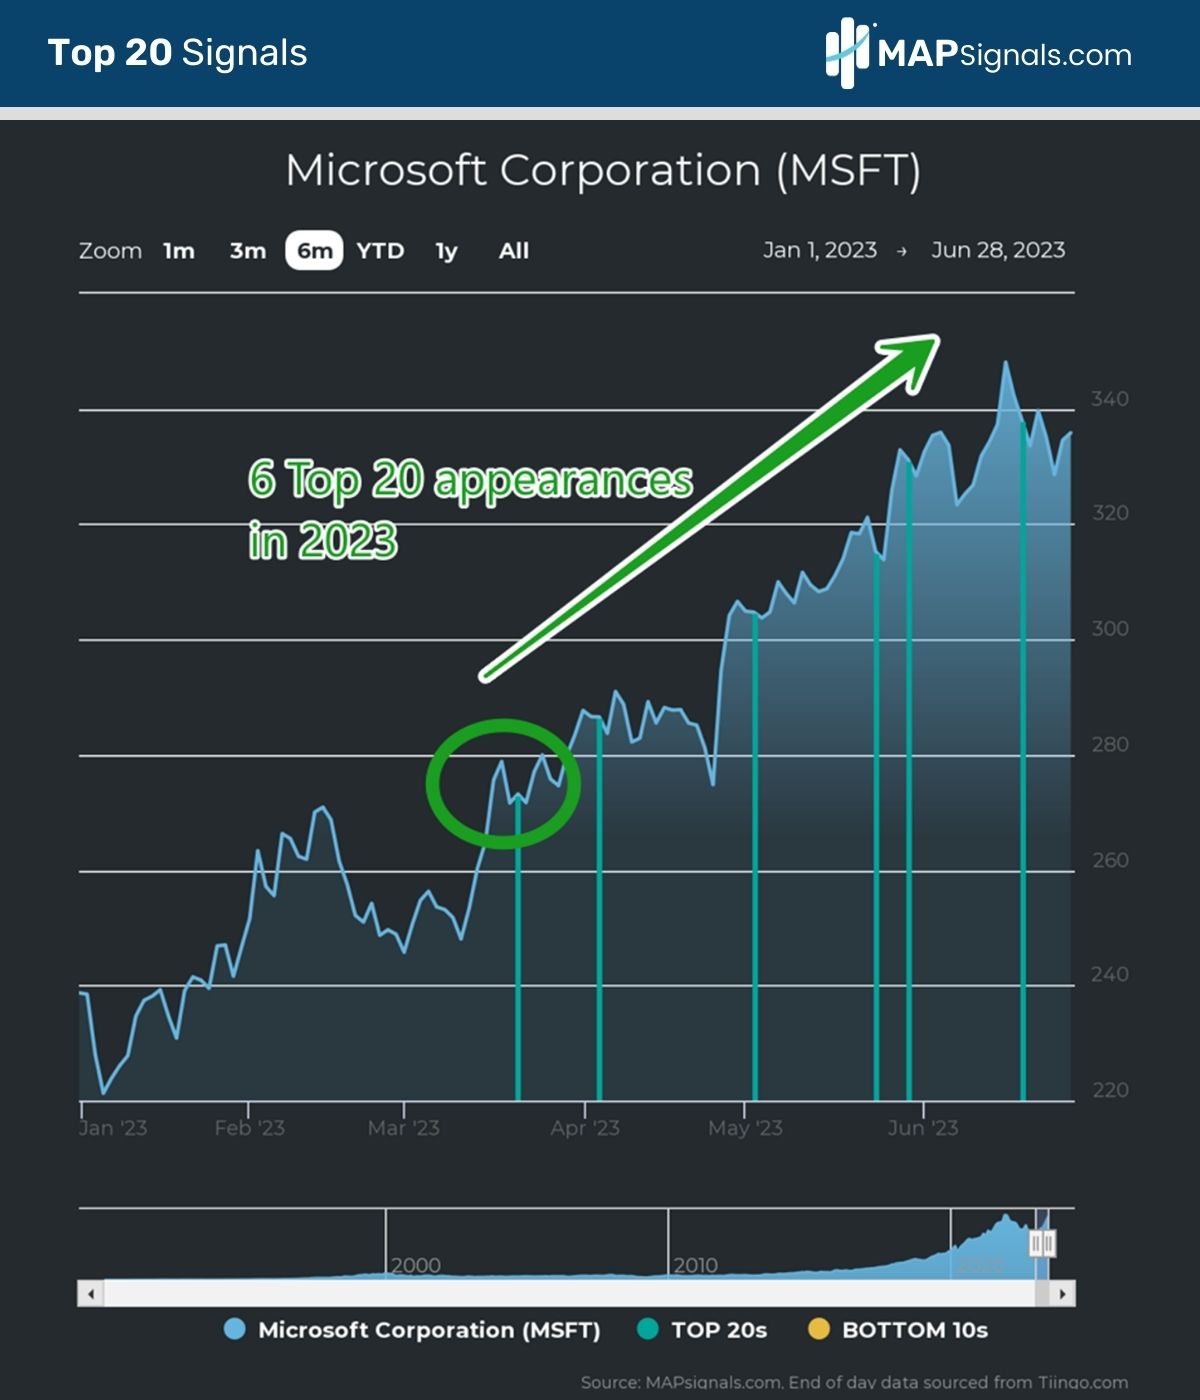 6 Top 20 Signals for Microsoft Corp. (MSFT) in 2023 | MAPsignals